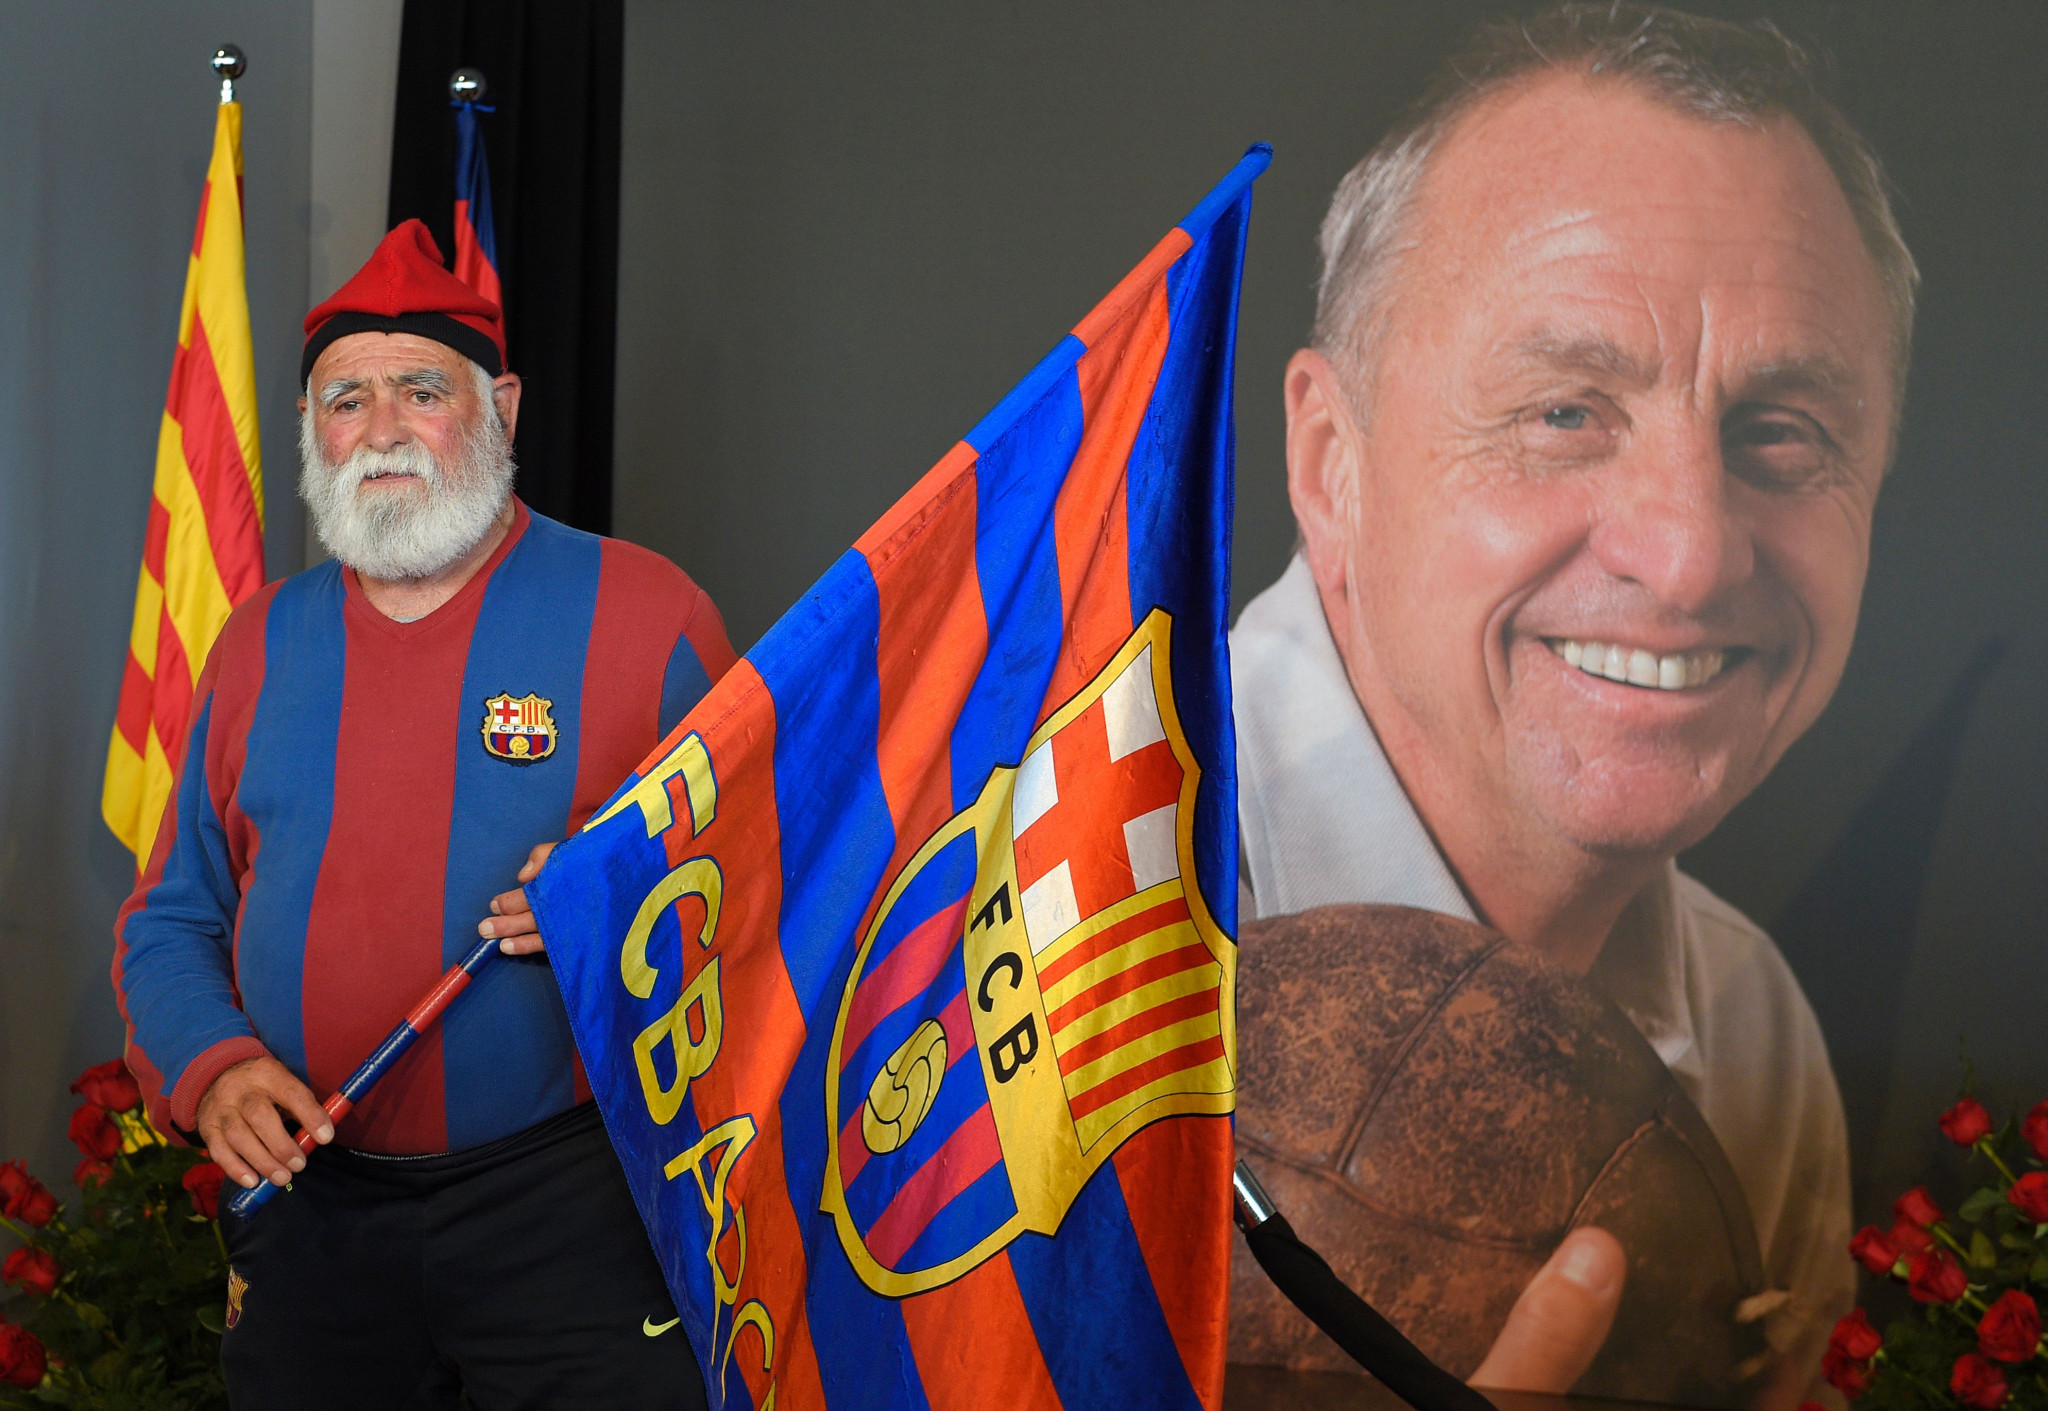 Johan Cruyff's spell as player and coach at Barcelona led to a revolution at the club that they are still benefitting from even after his death in 2016 ©Getty Images